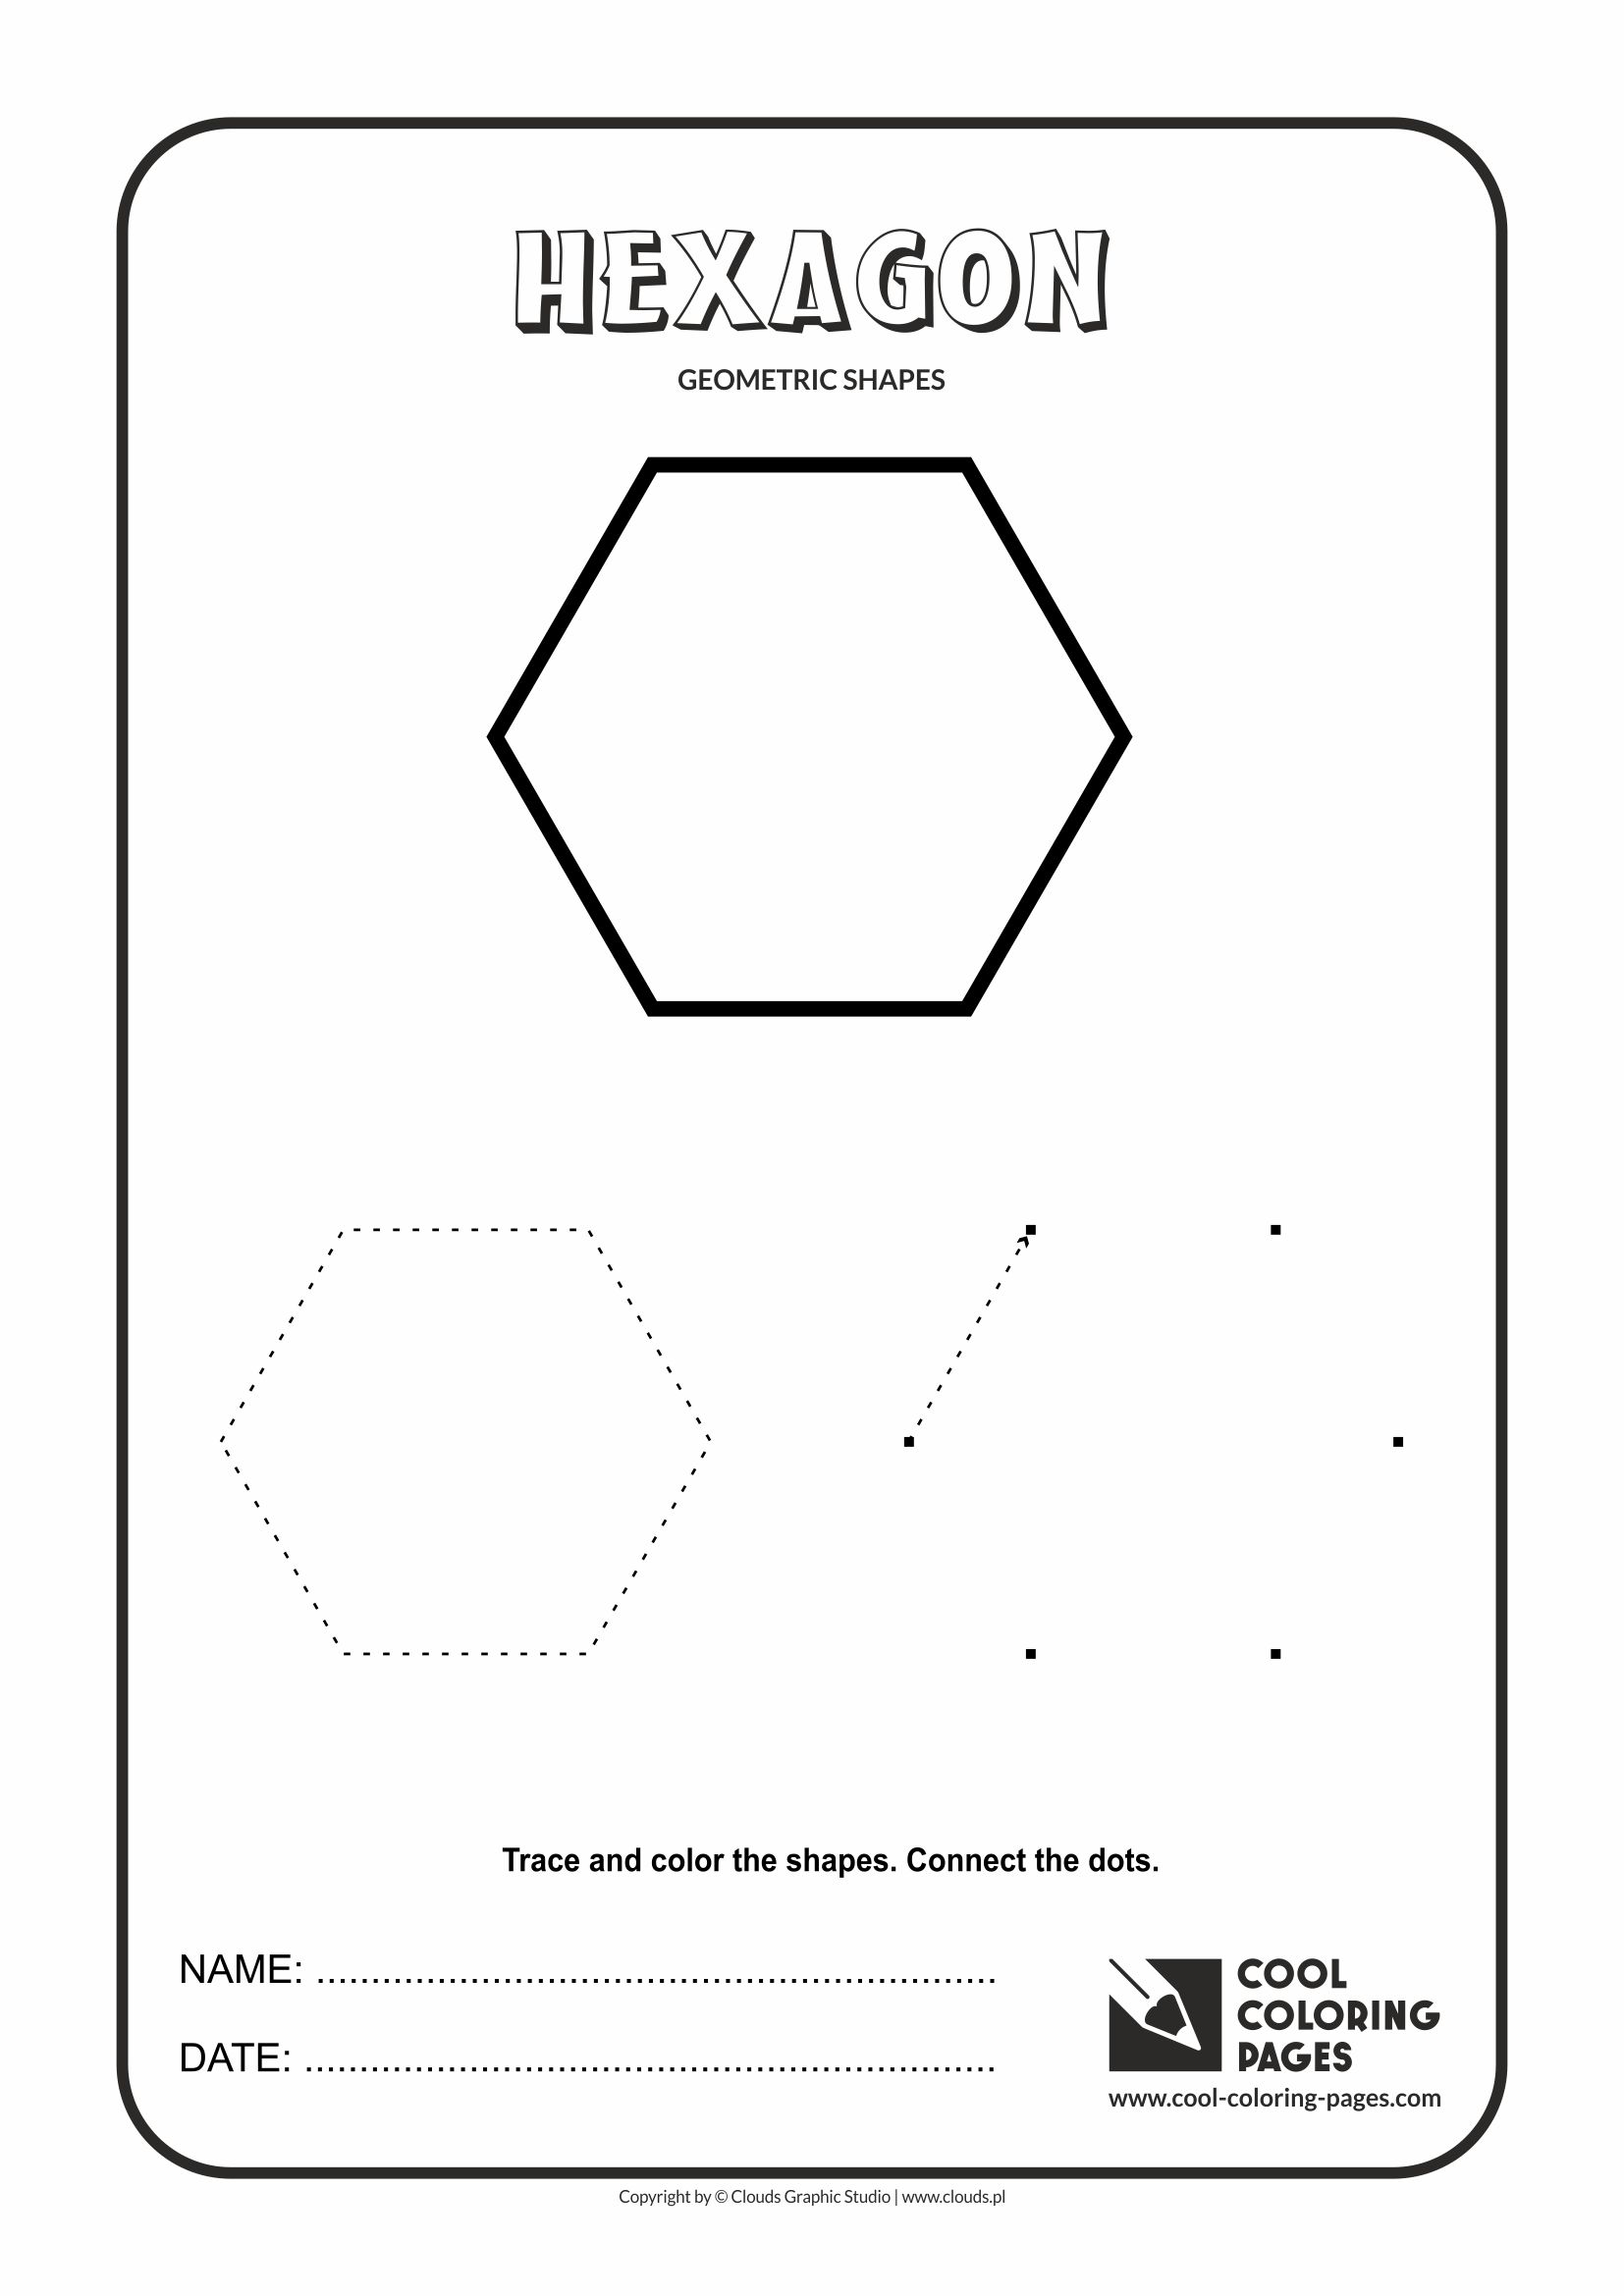 Geometric Patterns Coloring Pages - Digital Tessellation Coloring